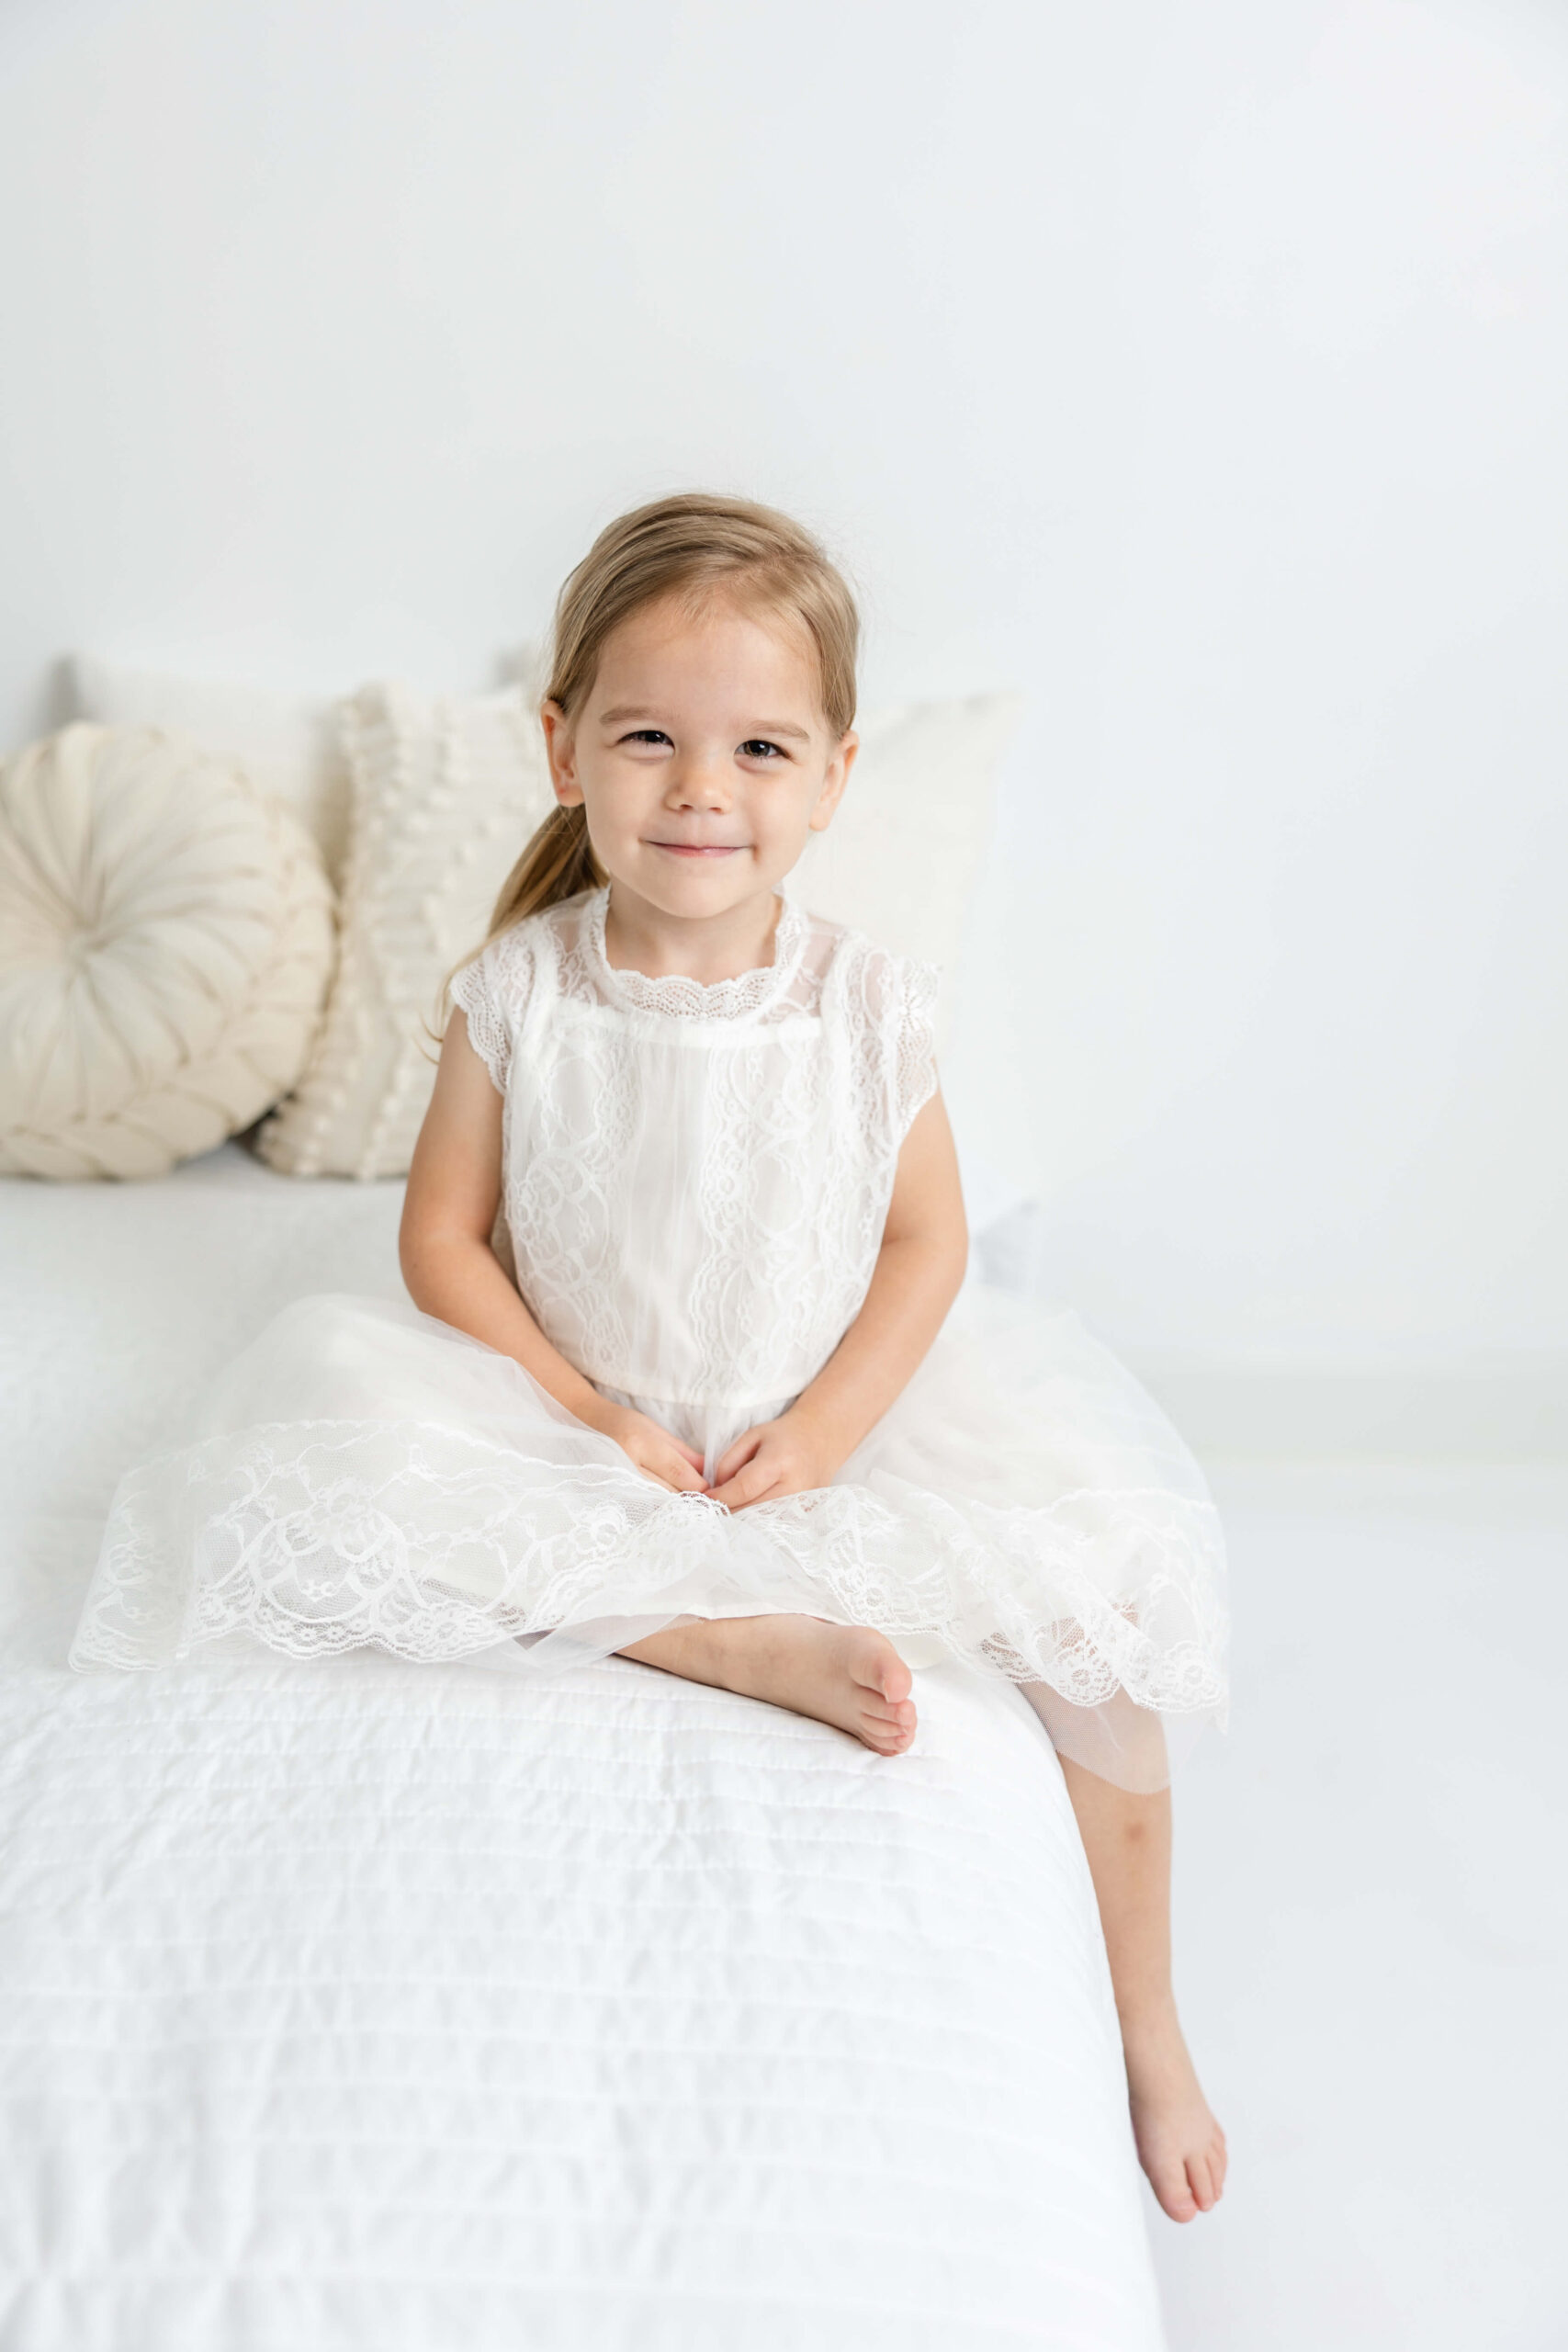 Two year old in white dress from client closet, sitting on bed during child portrait session.